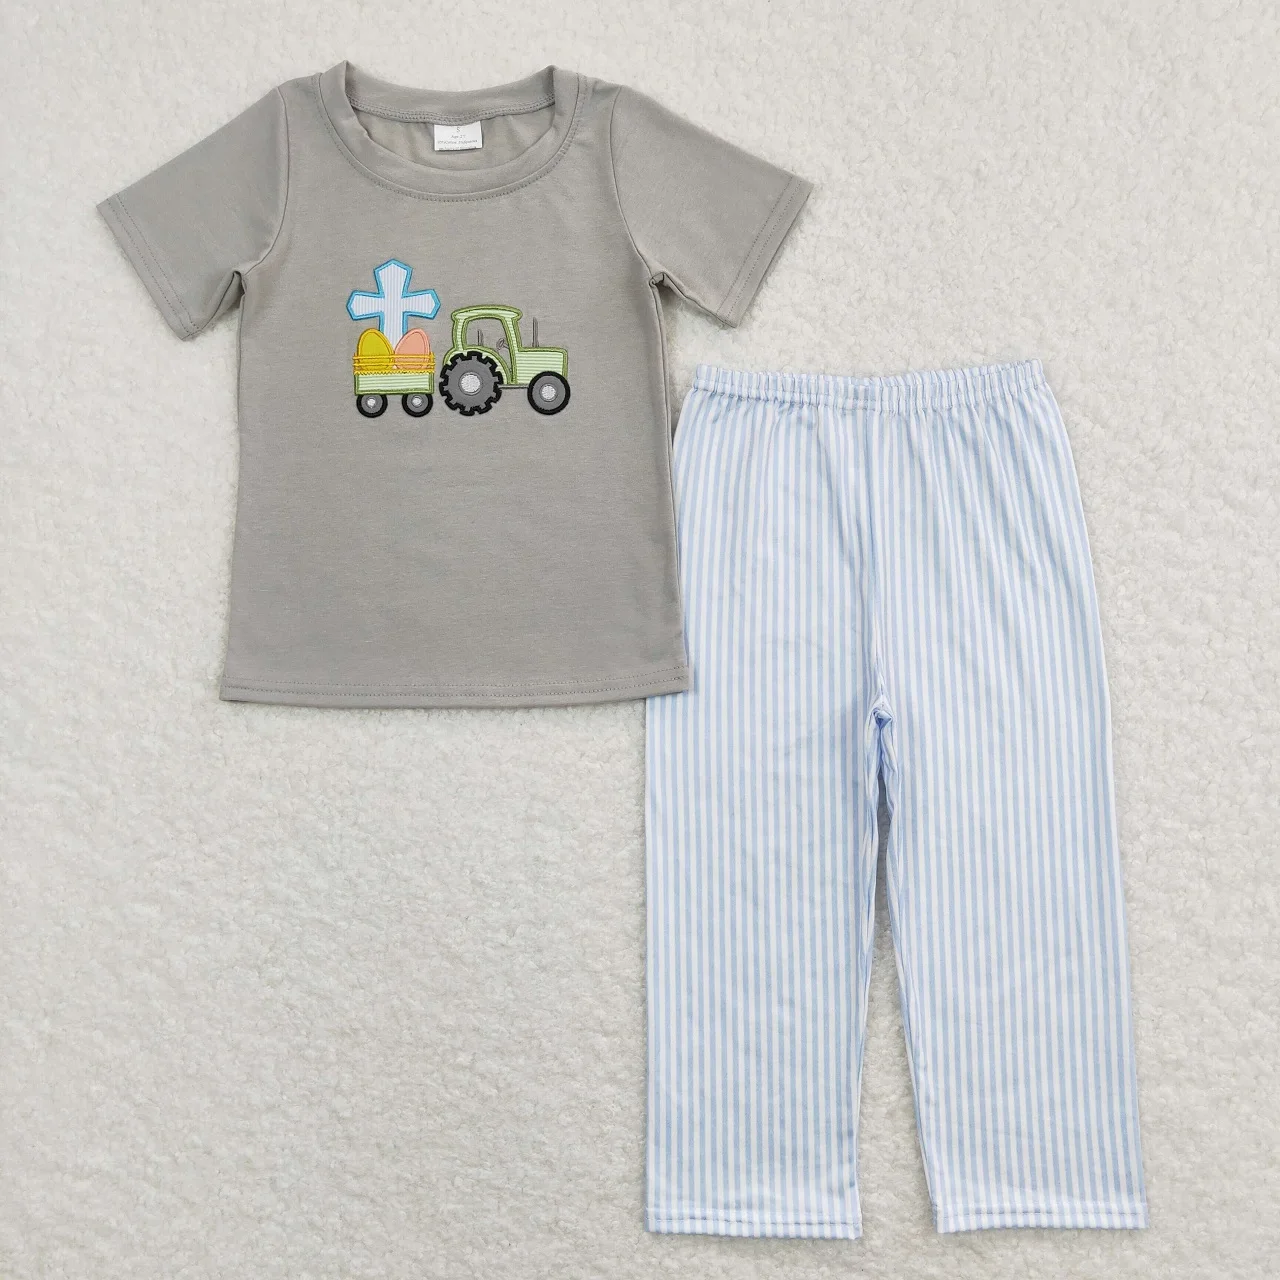 

Wholesale Baby Boy Easter Set Children Short Sleeves Embroidery Tractor Eggs Shirt Blue Stripes Pants Infant Pajamas Outfit